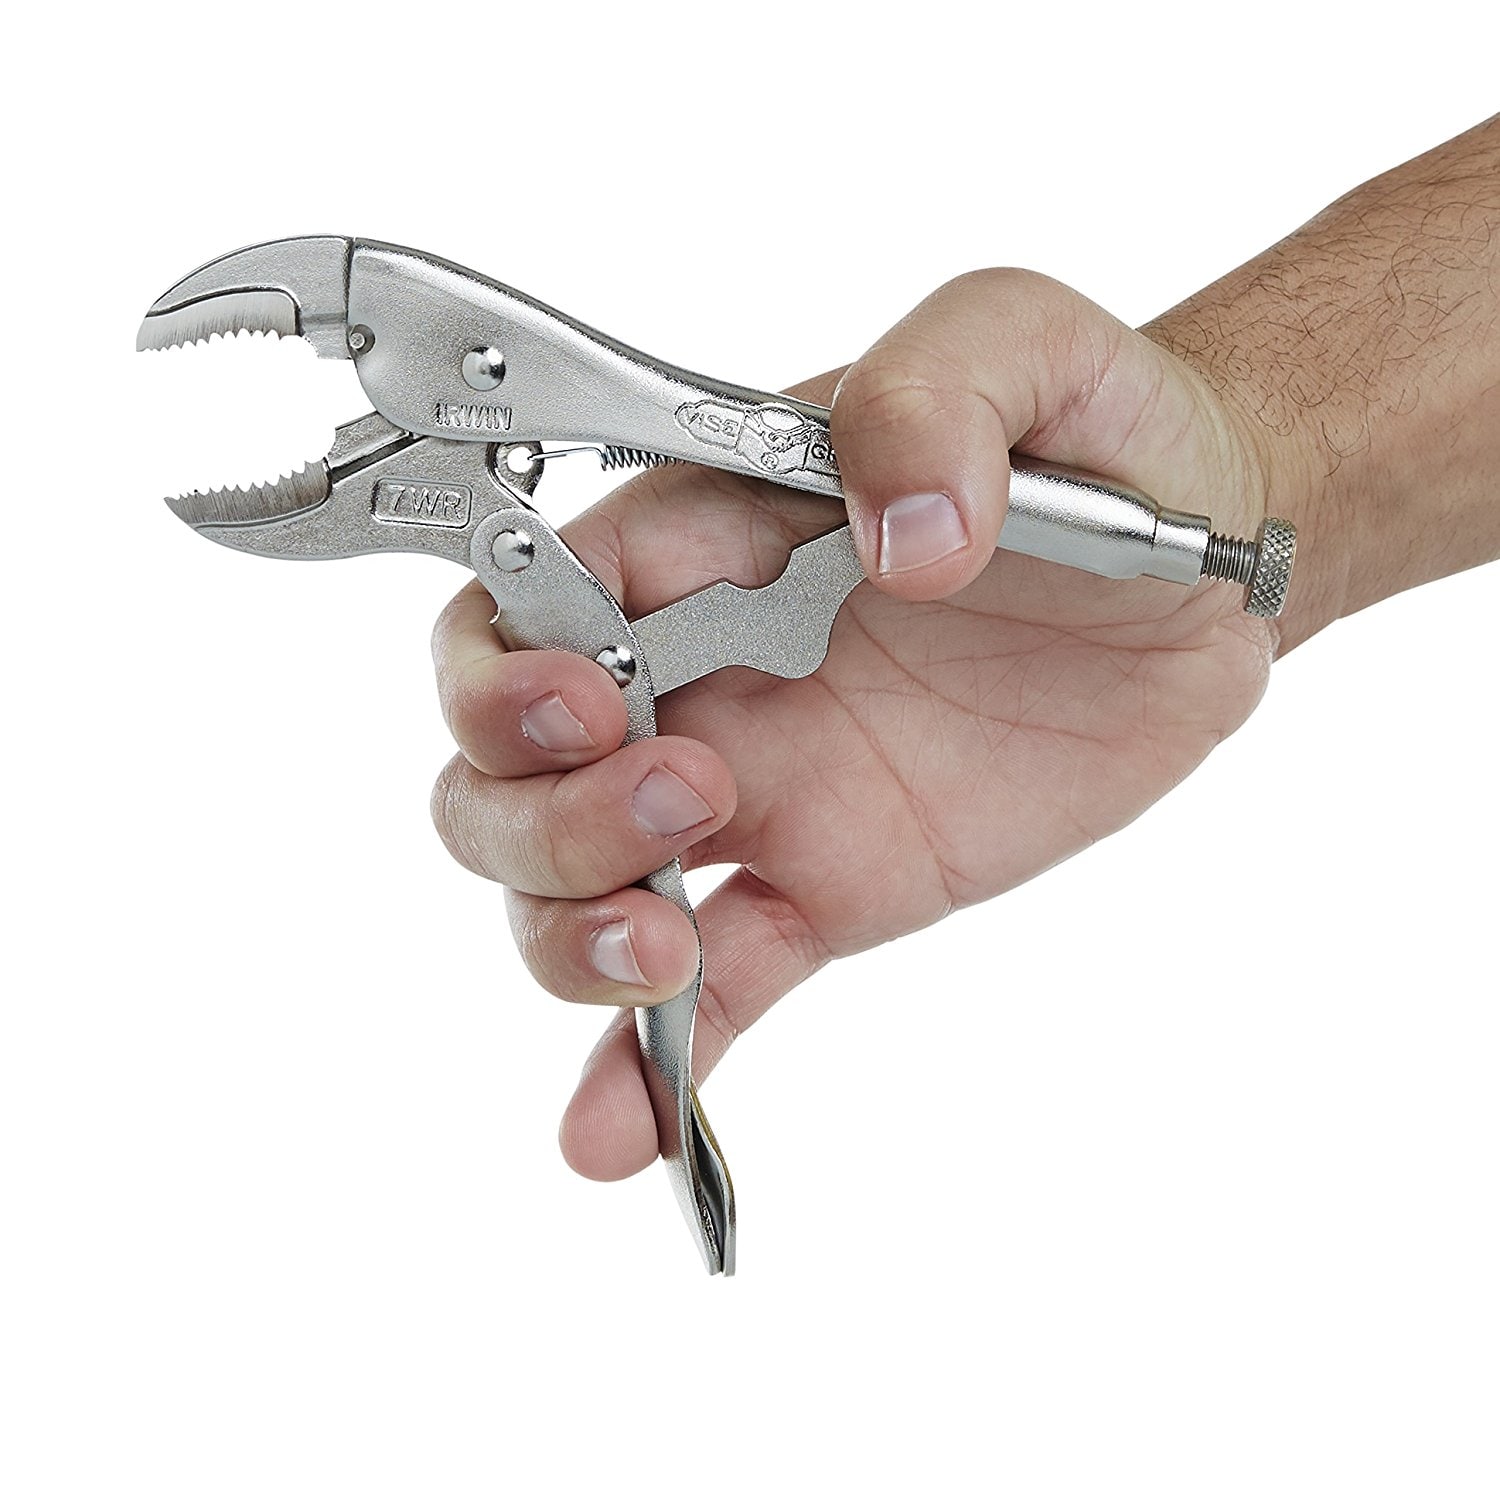 Irwin Vise-Grip The Original 7 In. Curved Jaw Locking Pliers with Cutter -  Rancher Supply (RCS)